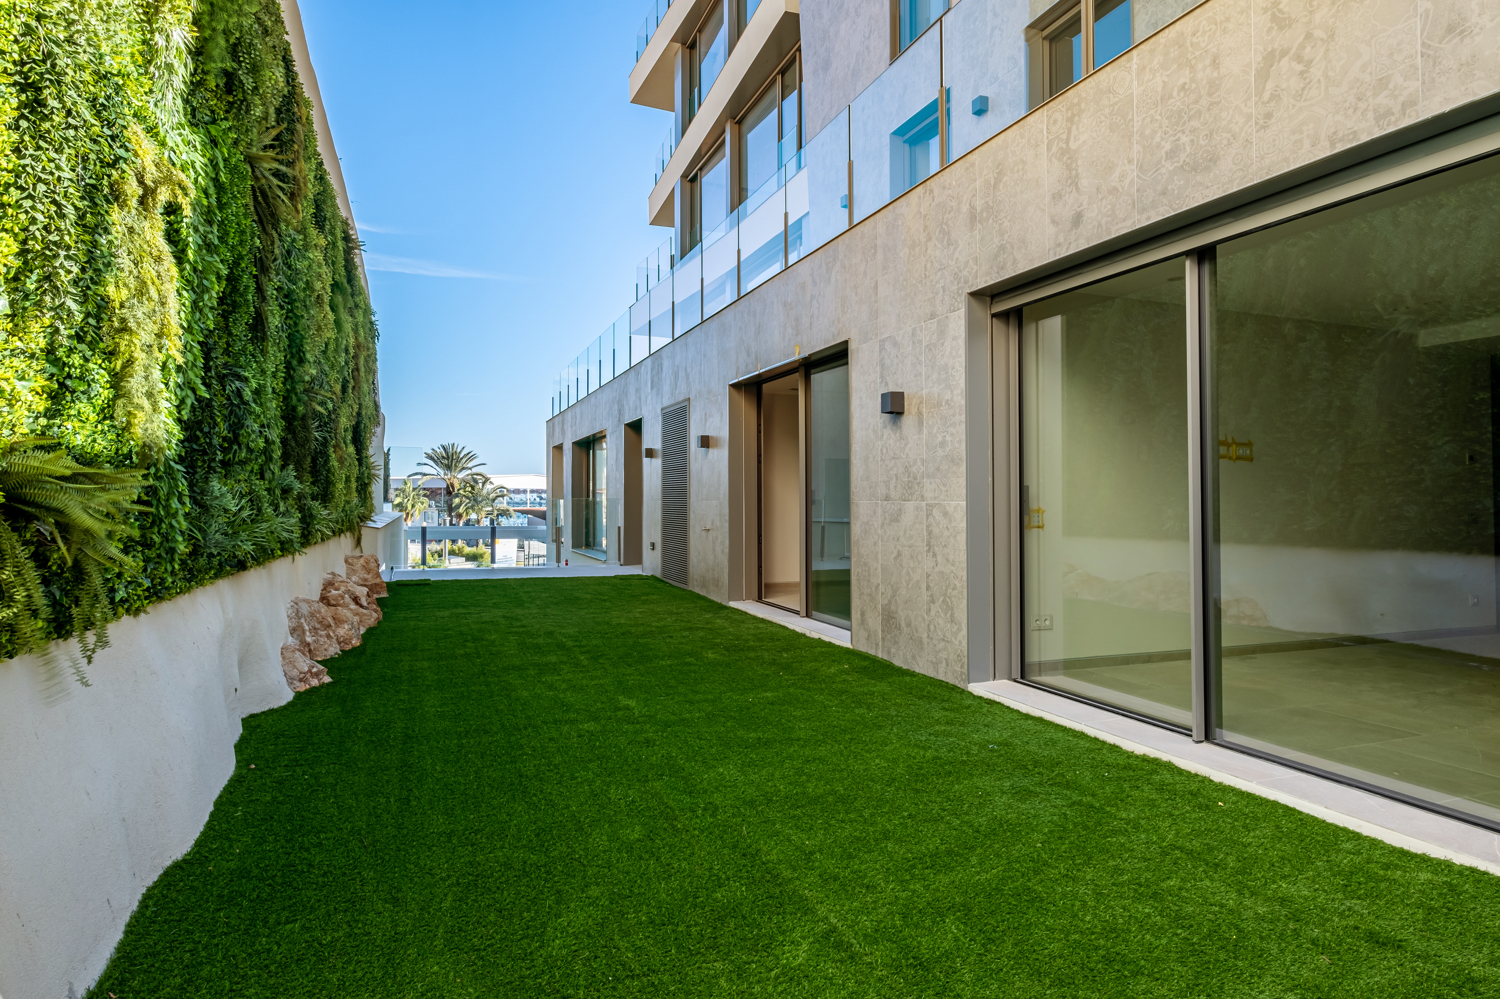 NEW LUXURY DEVELOPMENT WITH TERRACE AND GARDEN IN PALMA